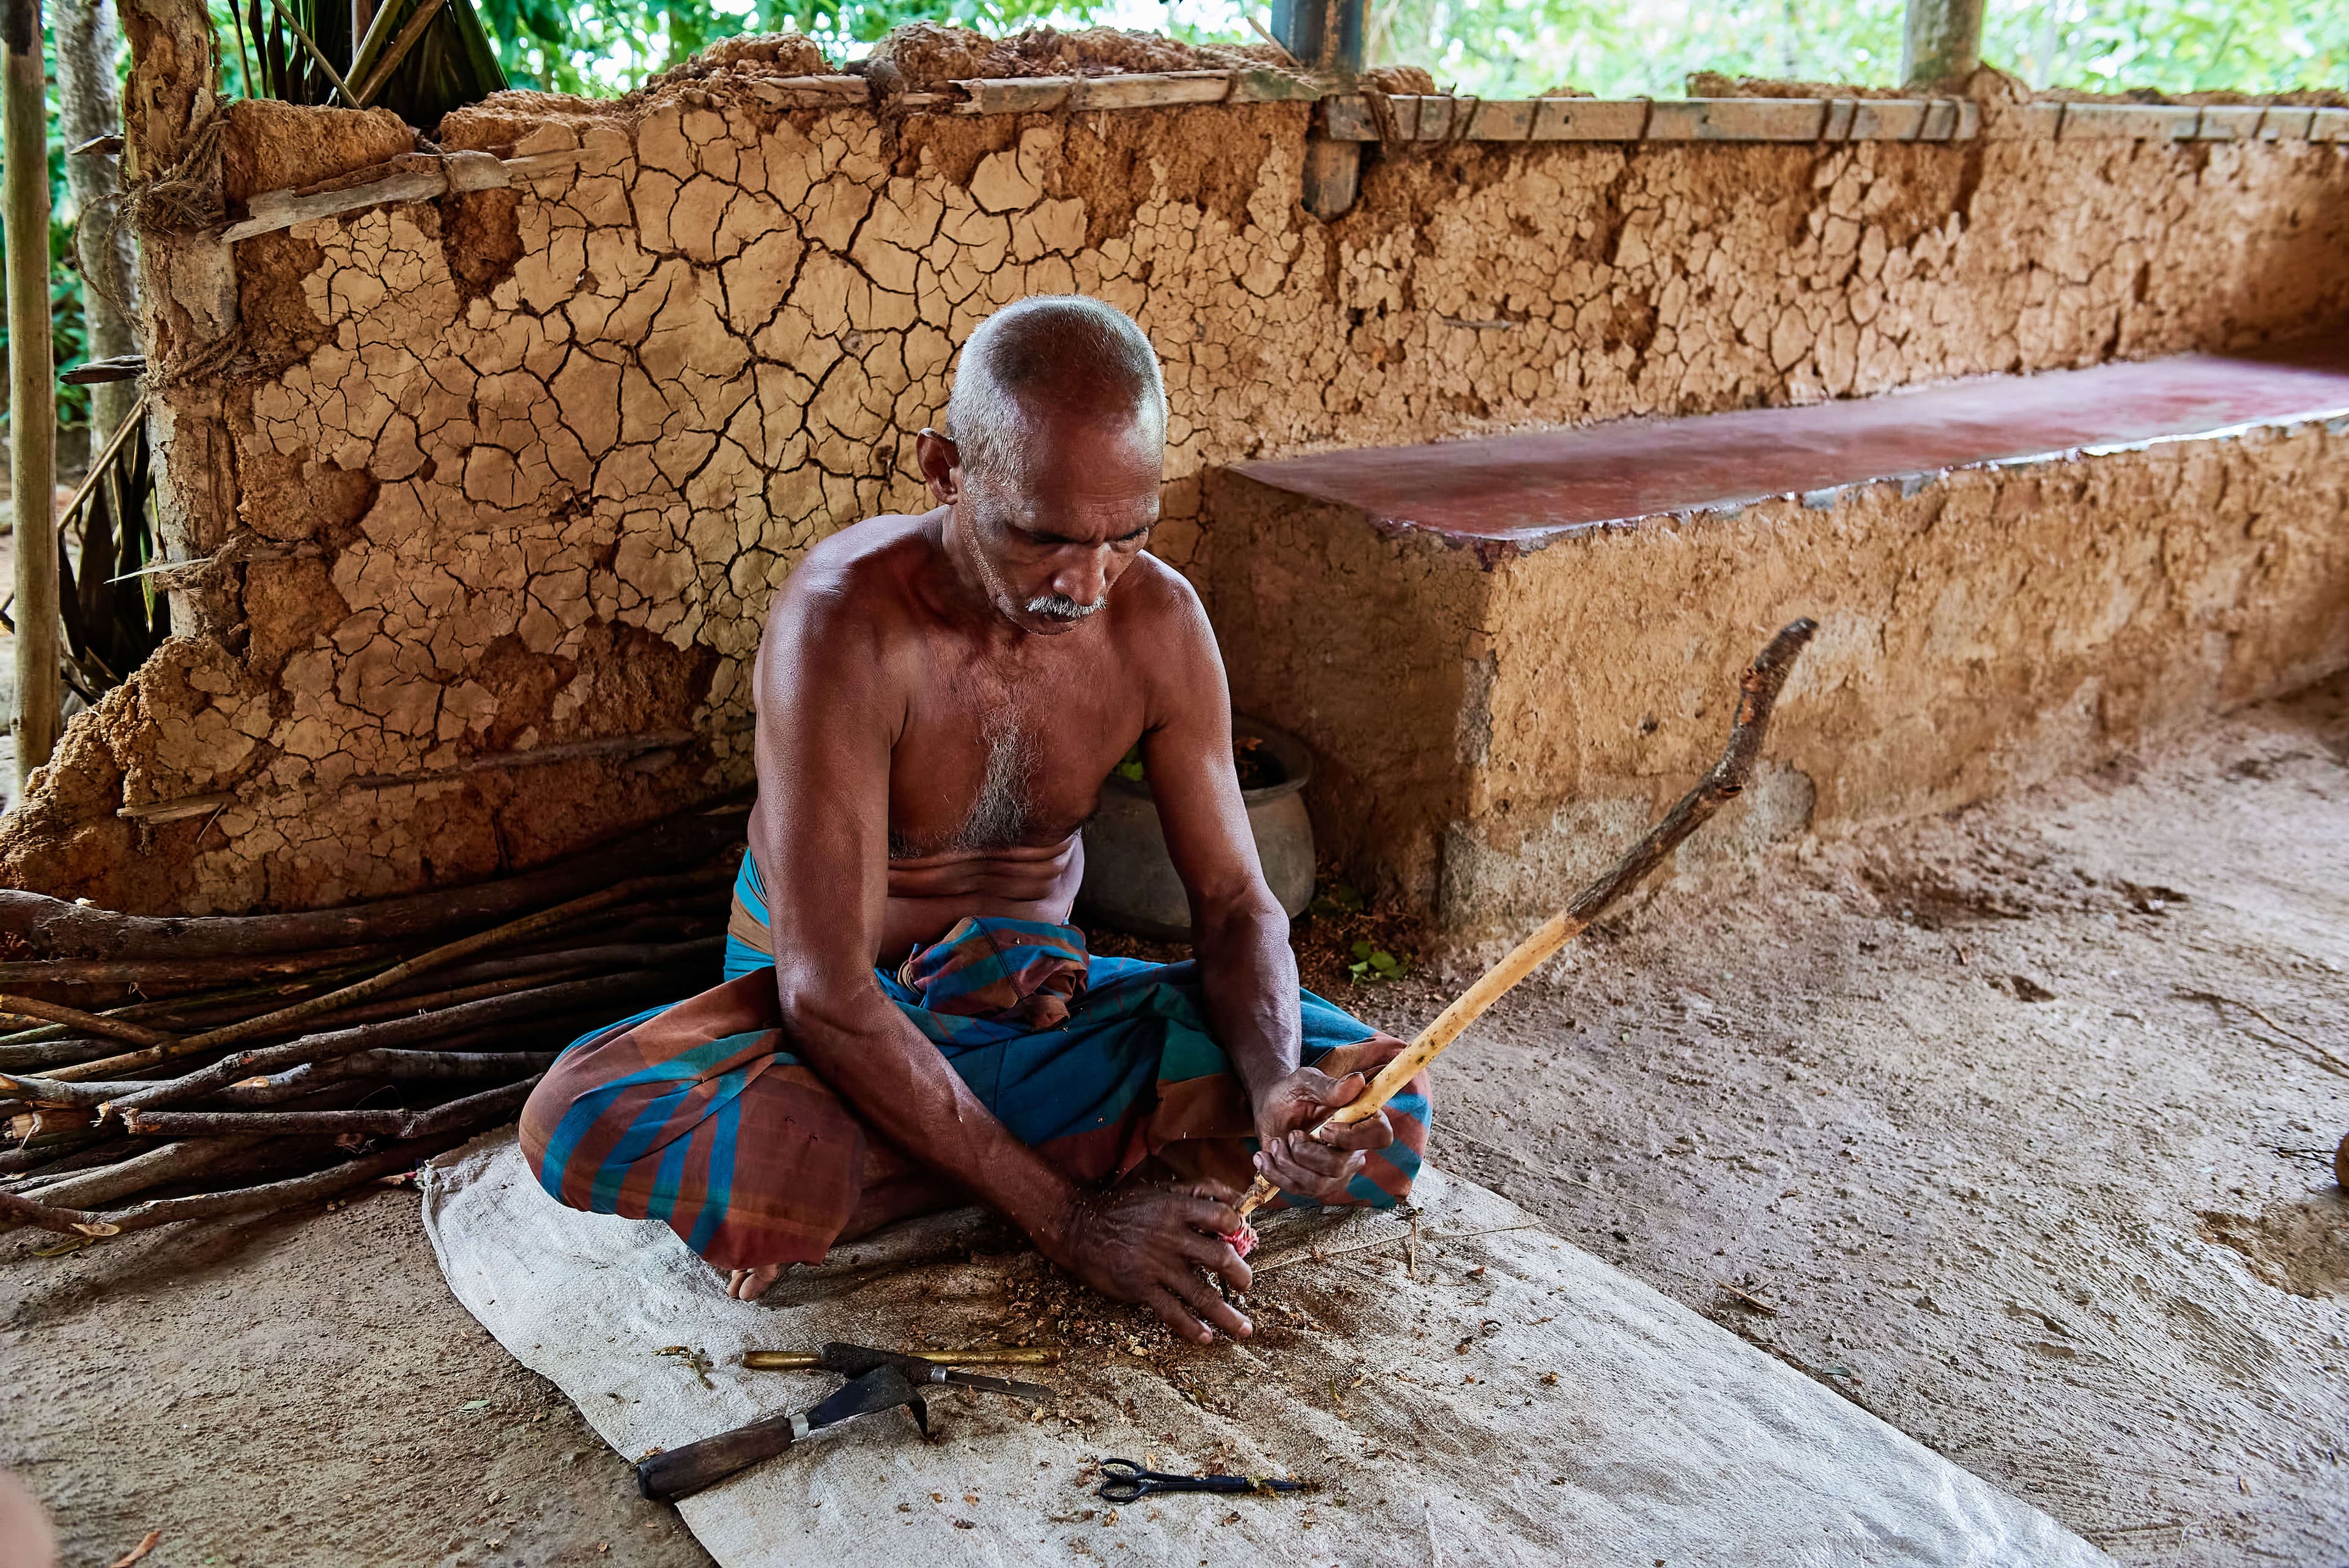 A photograph of a man making cinnamon in Galle